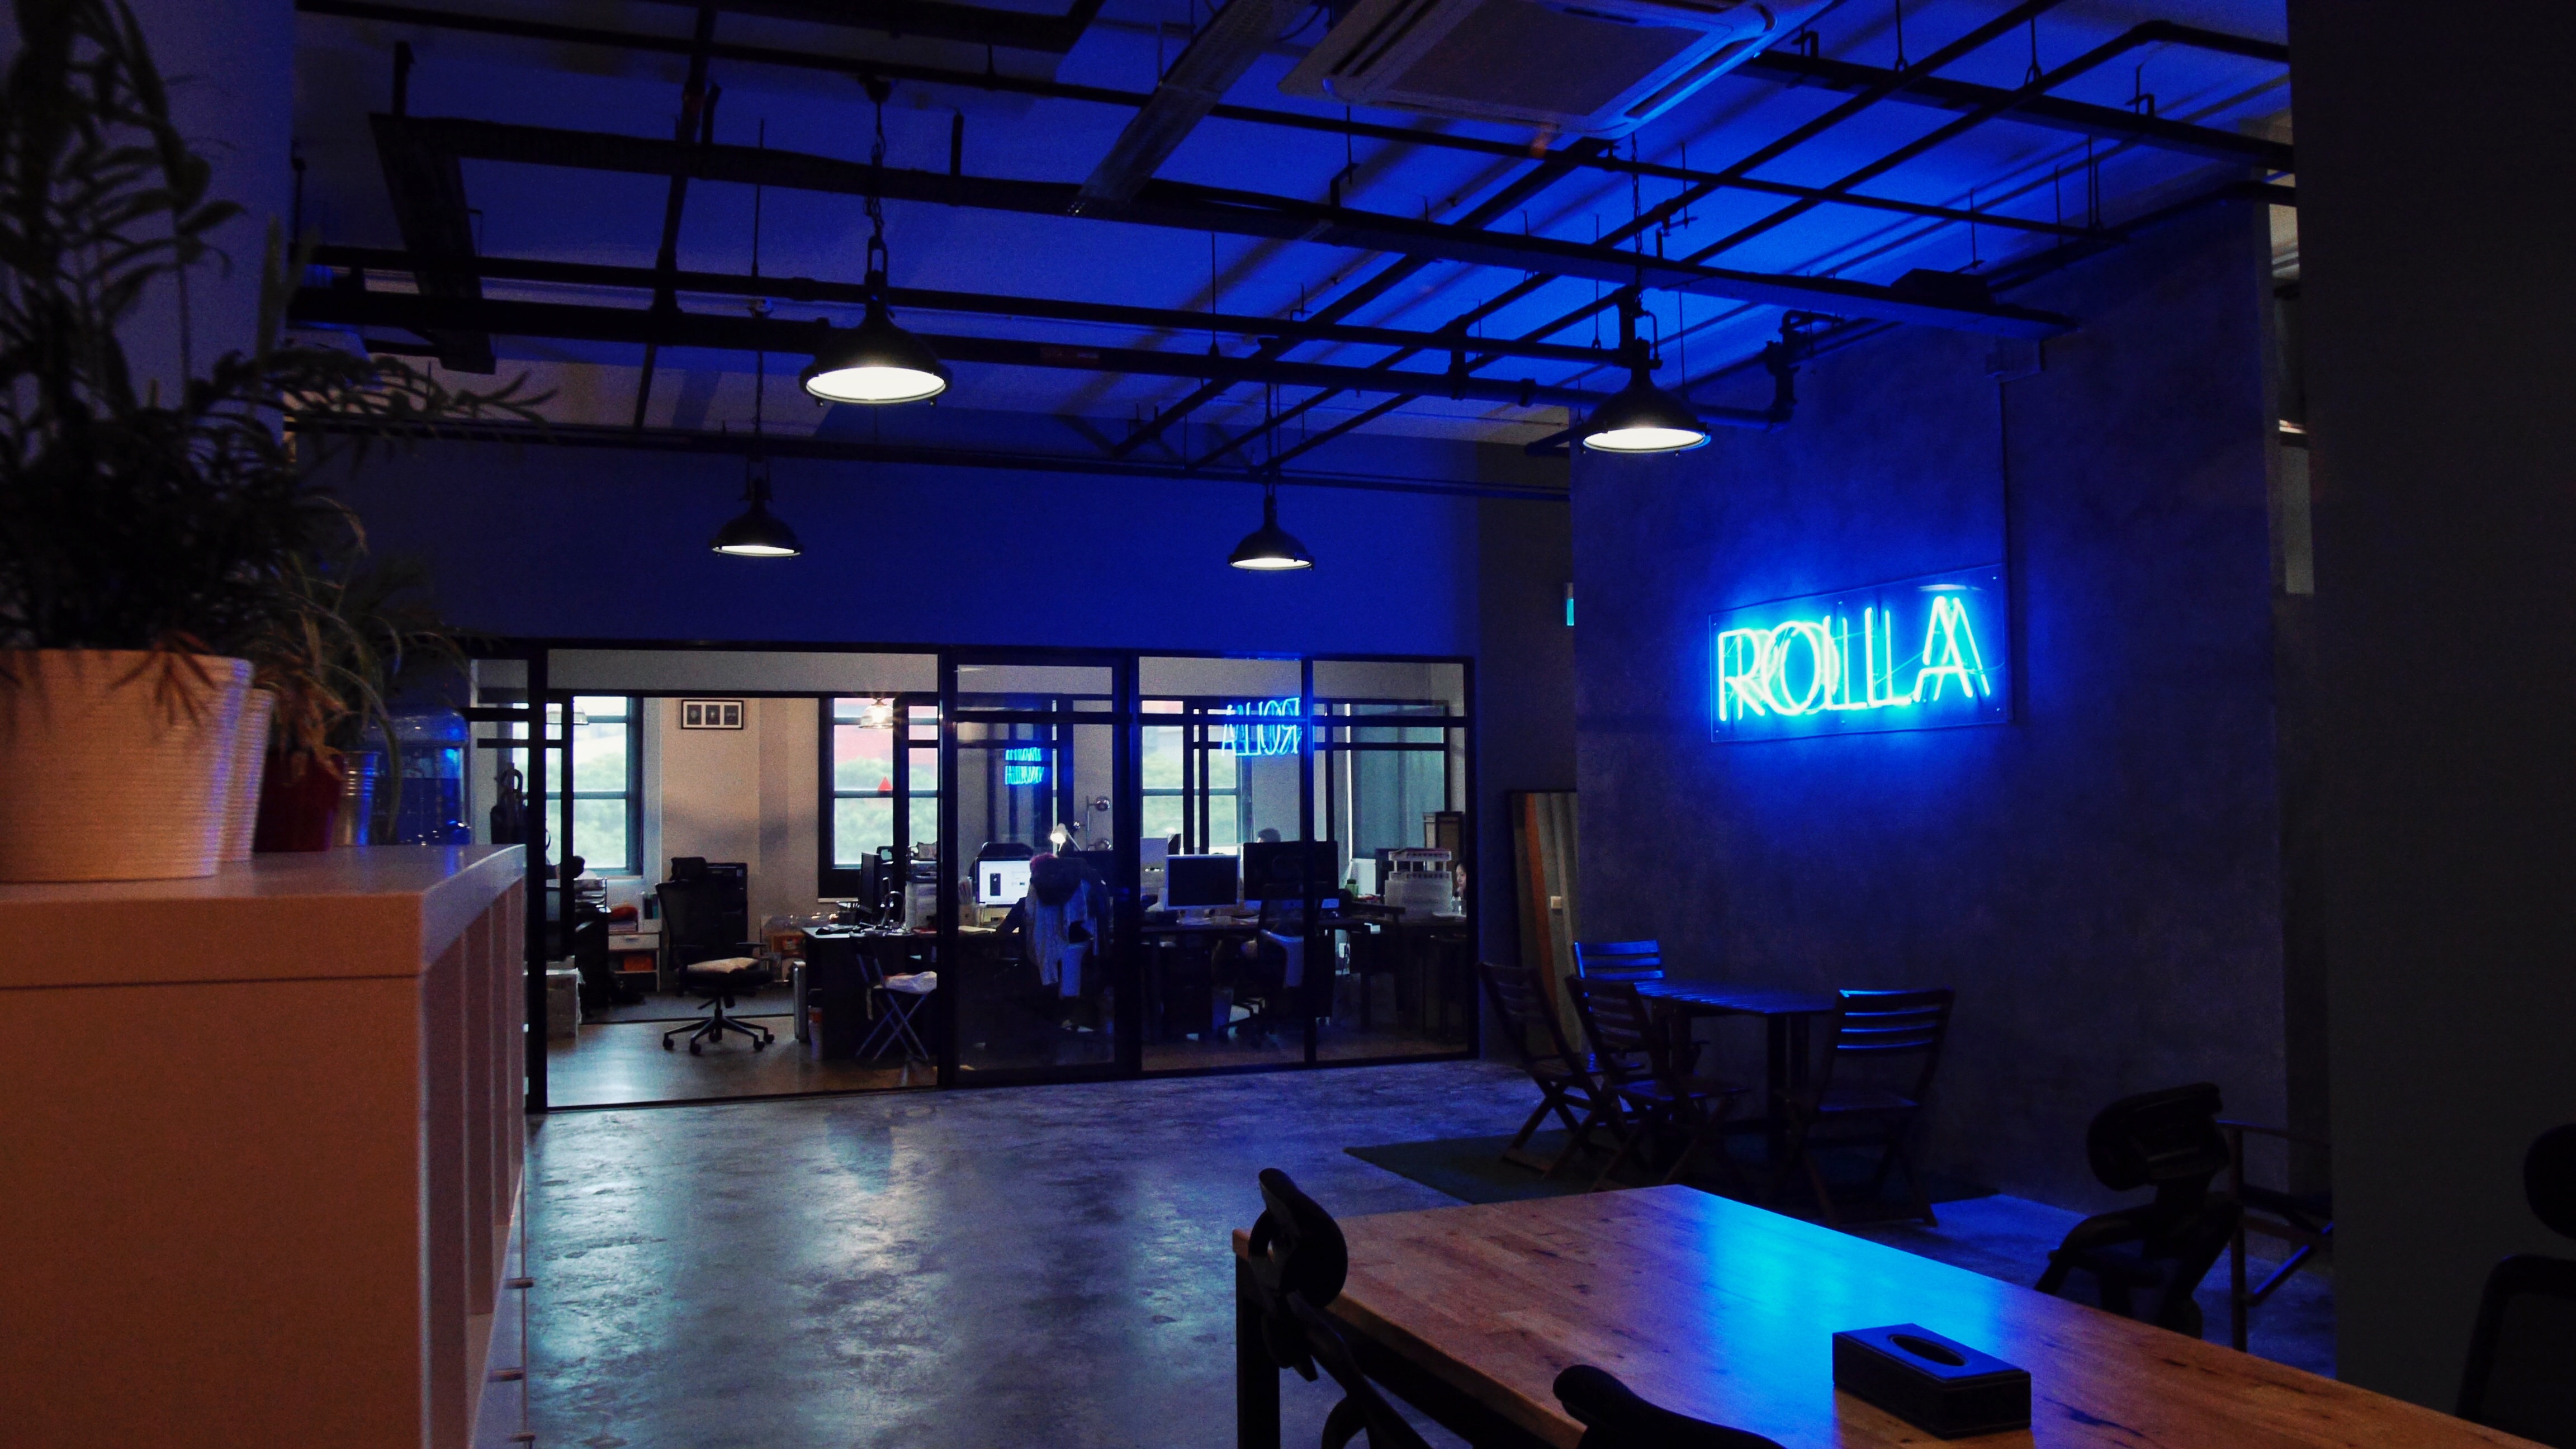 About – ROLLA